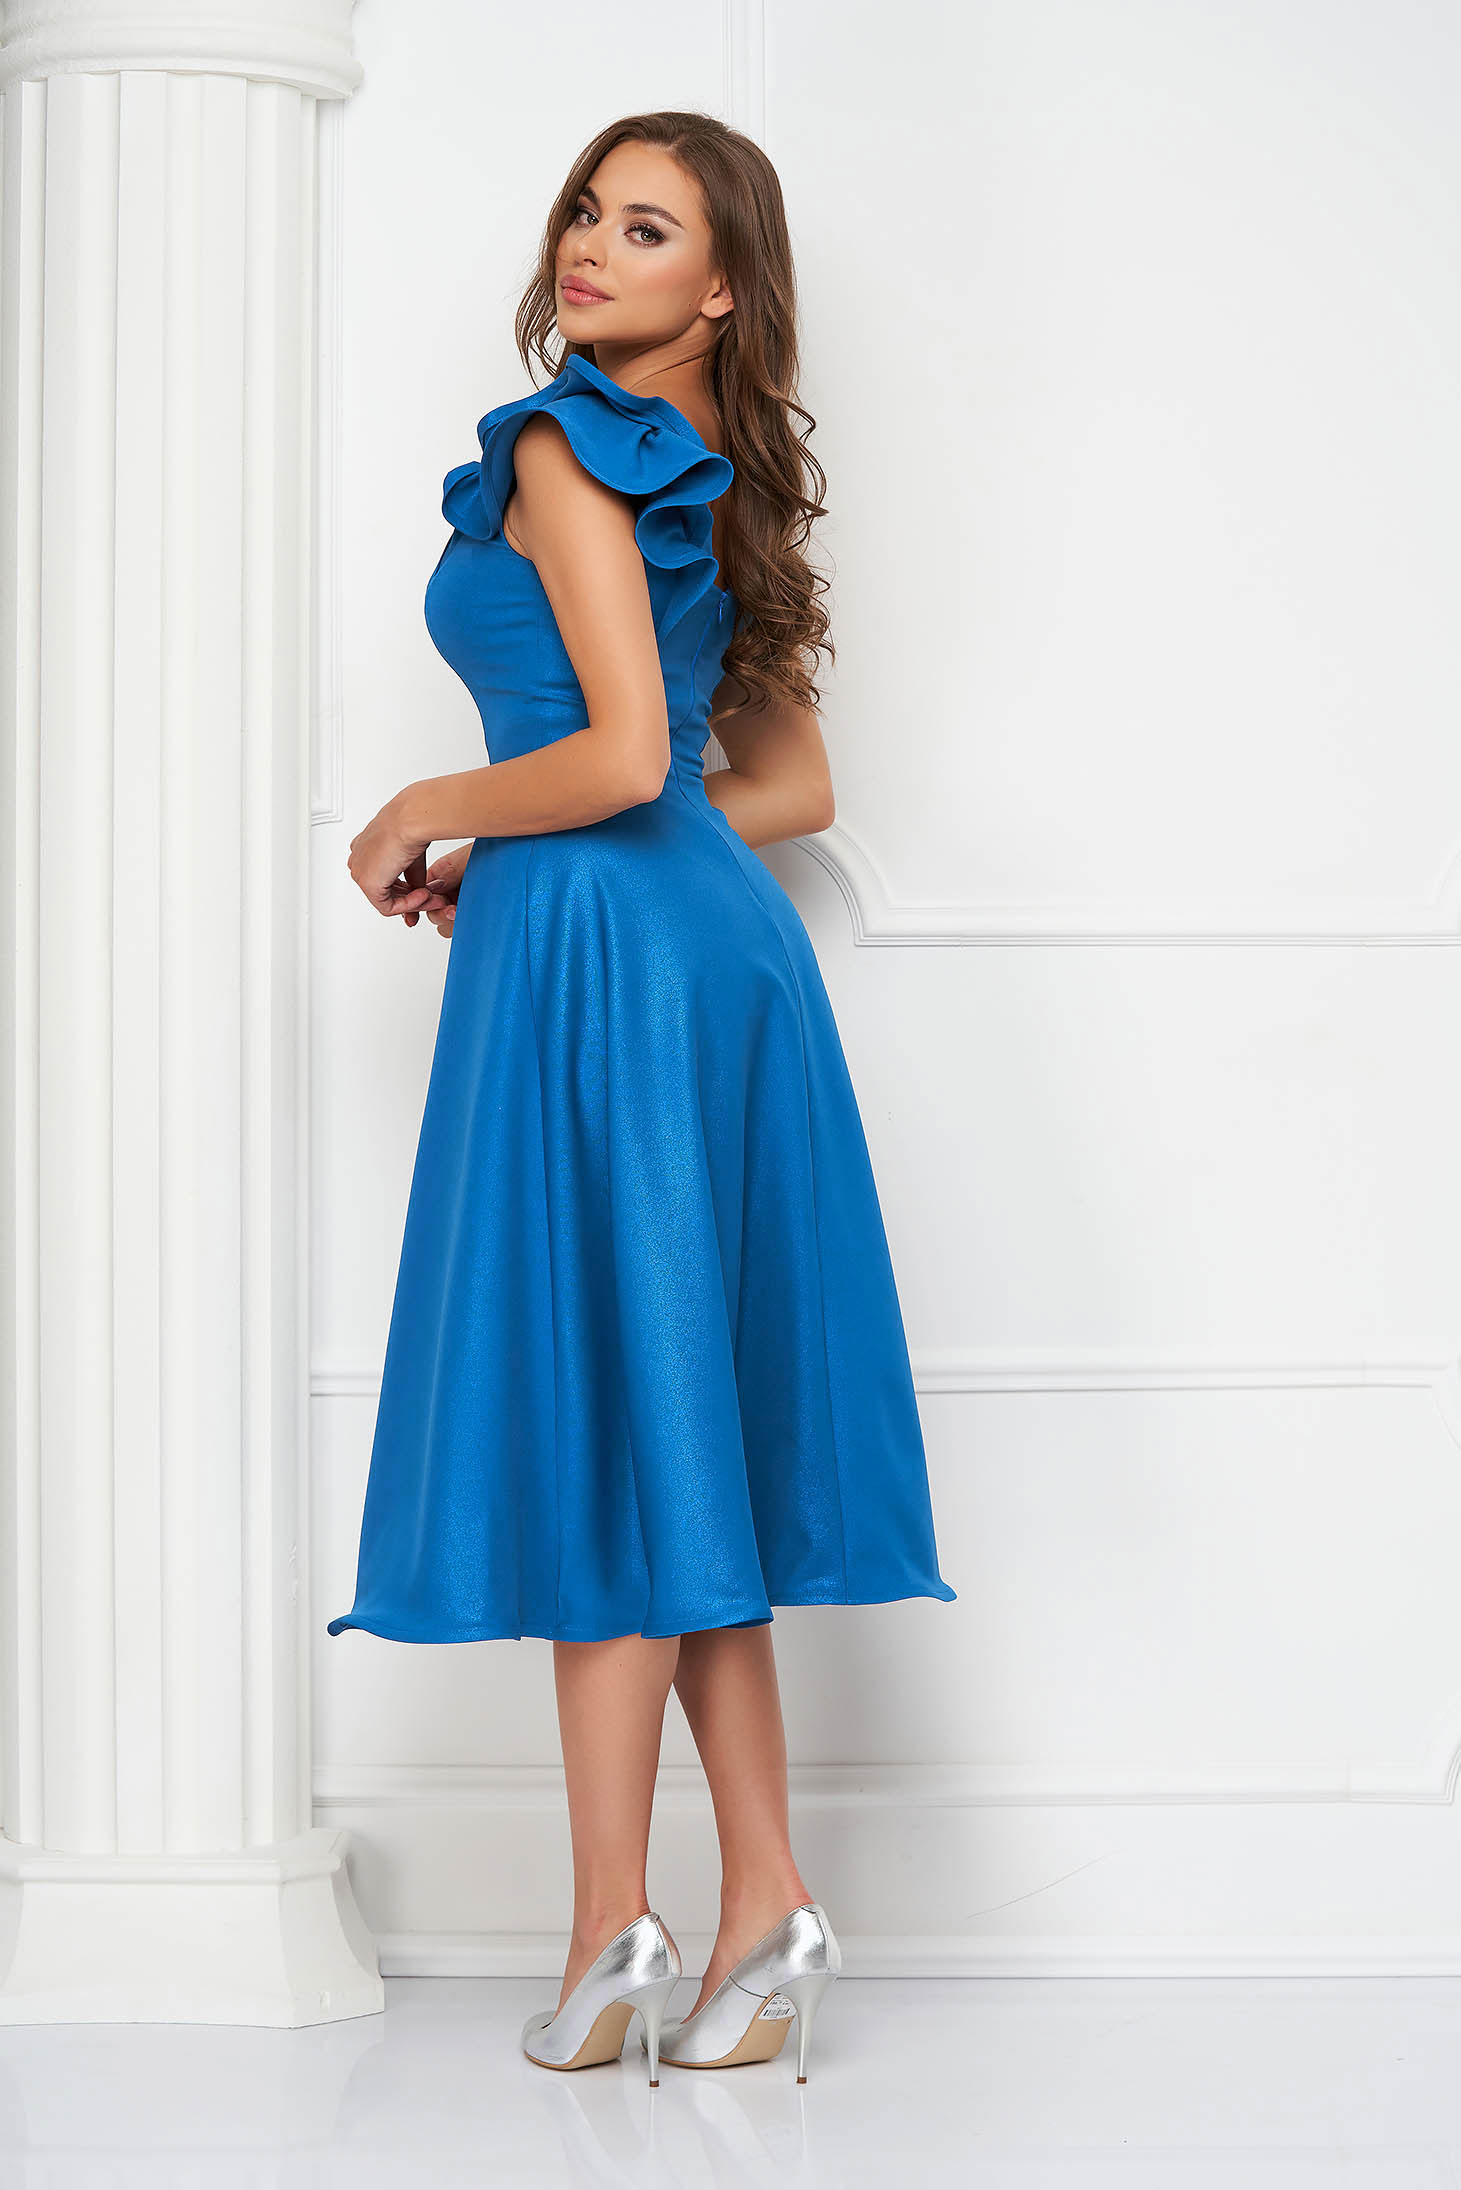 Blue Elastic Fabric Dress with Ruffles on the Shoulder - StarShinerS 2 - StarShinerS.com